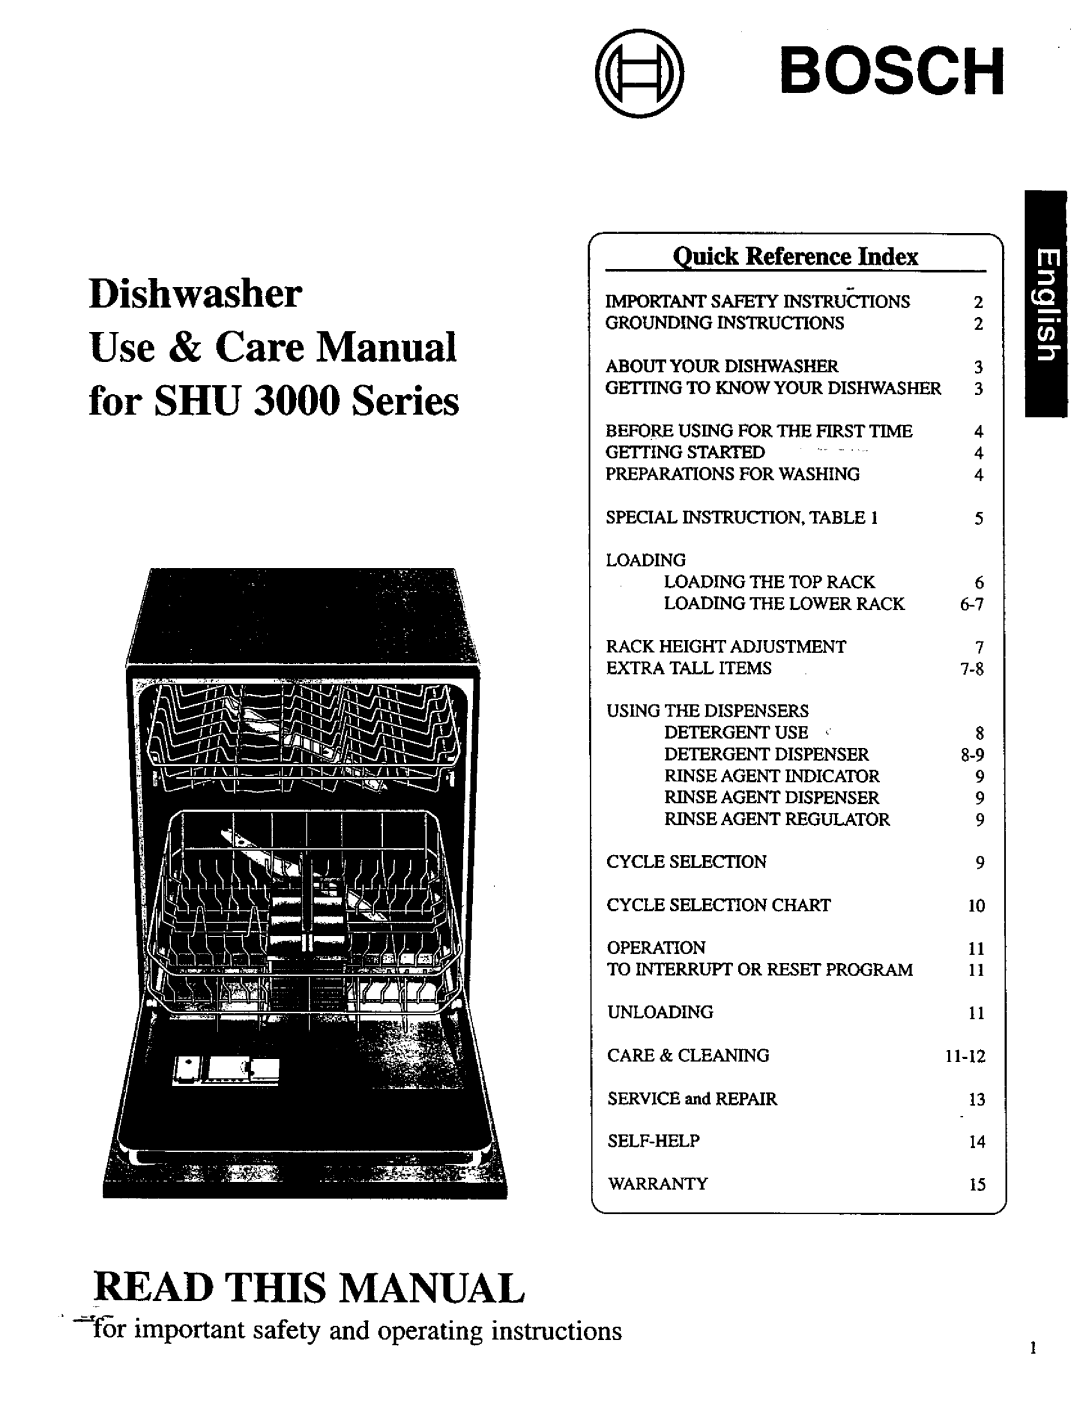 Bosch Appliances Quick Reference Index, @Bosch, Dishwasher Use & Care Manual for SHU 3000 Series, Read This Manual 